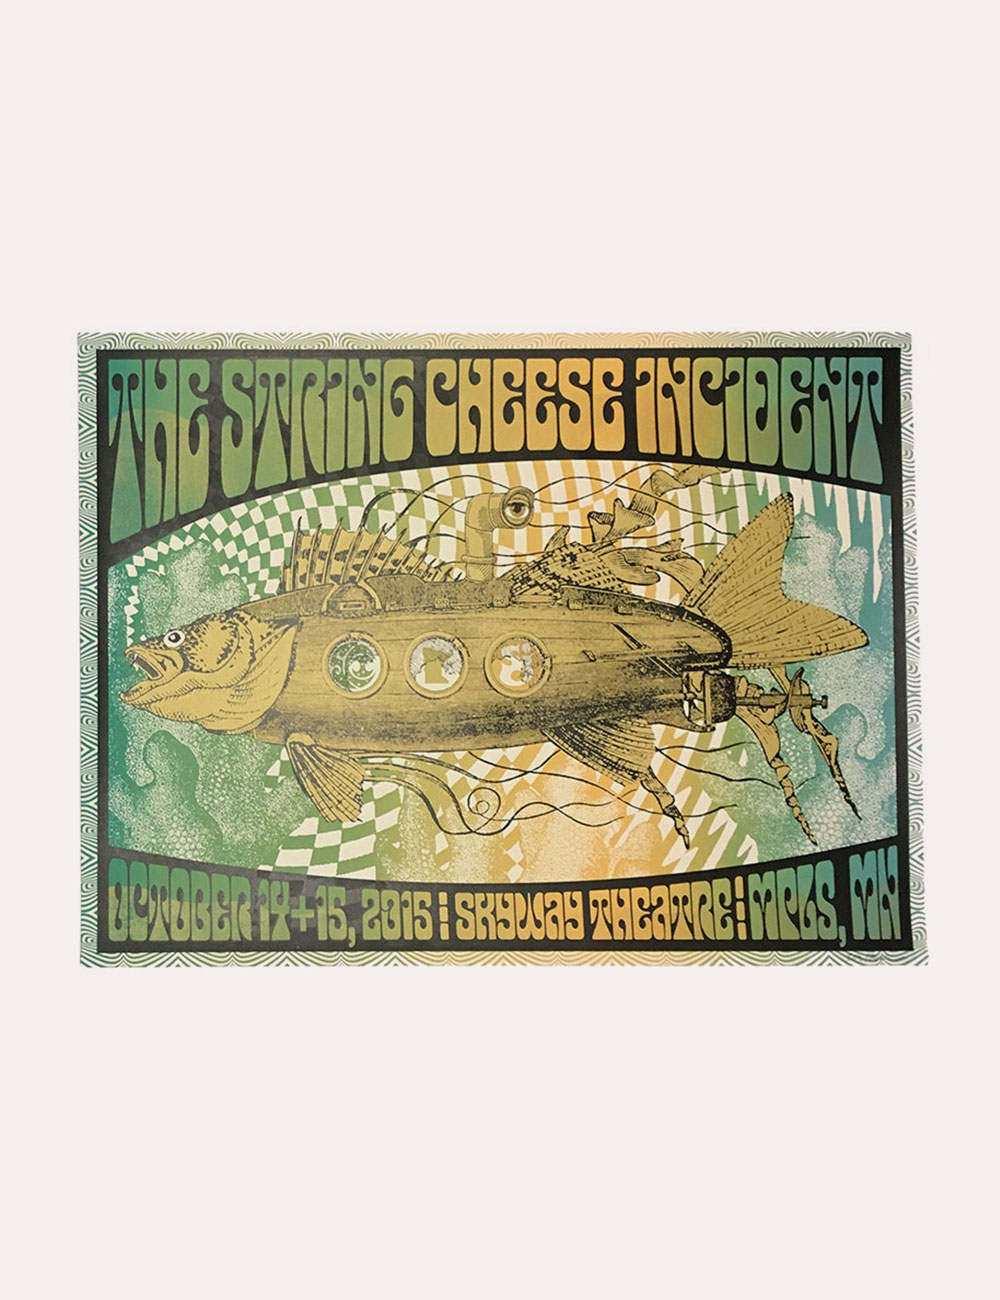 The String Cheese Incident - Merch - Gig Poster - 2015 Skyway Theatre Minneapolis MN Poster